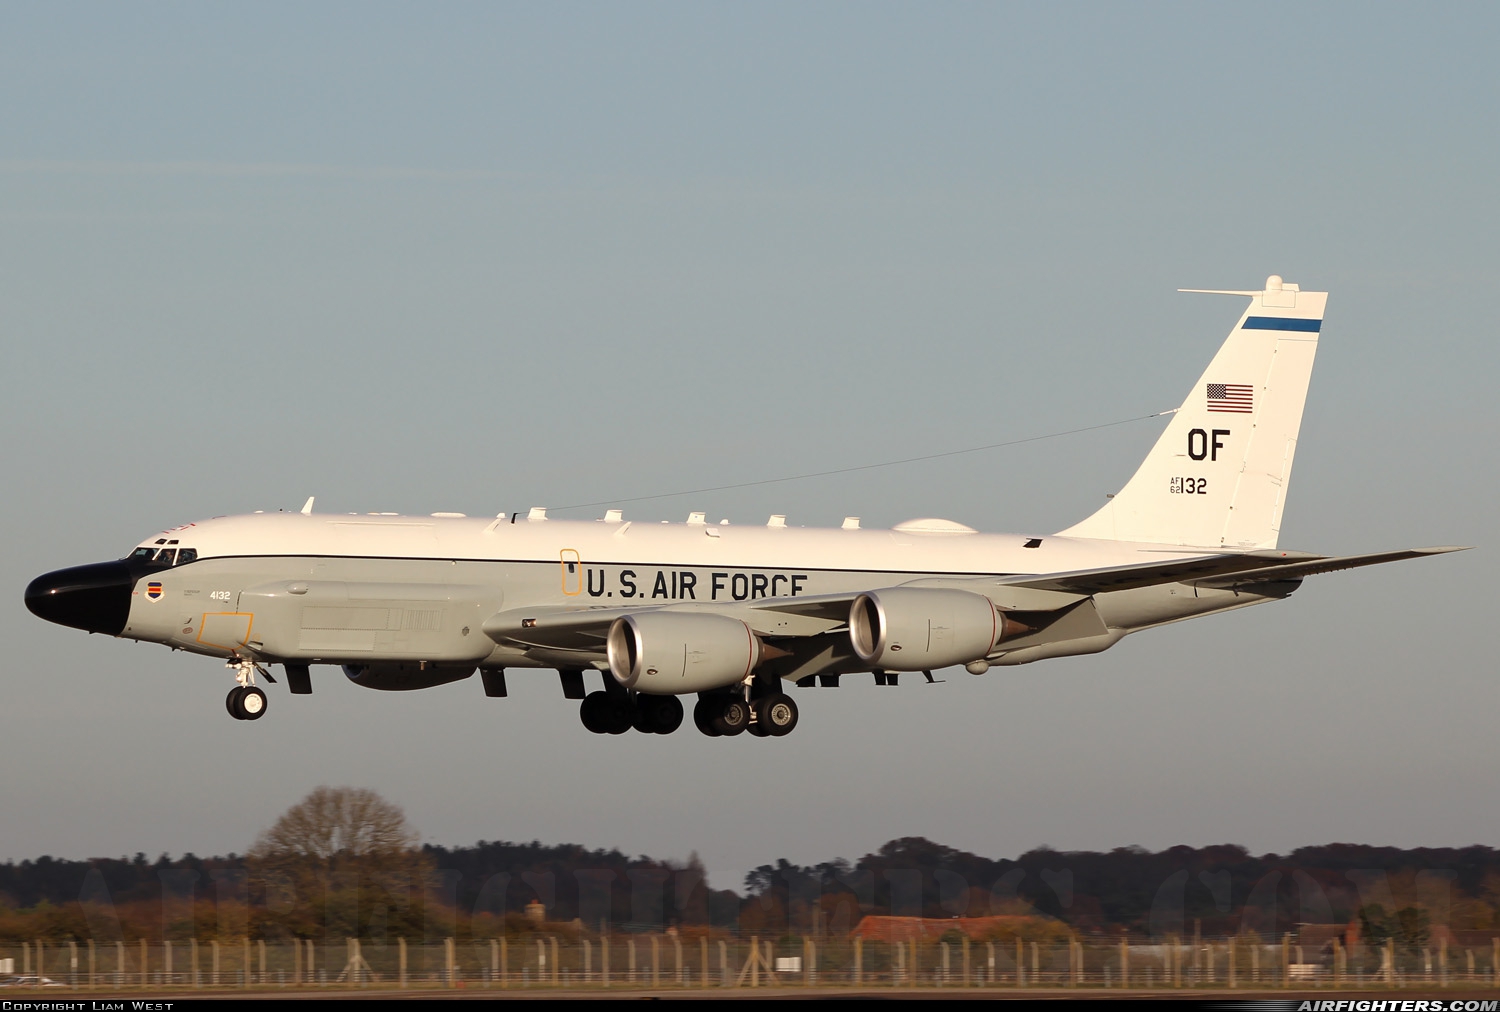 USA - Air Force Boeing RC-135W Rivet Joint (717-158) 62-4132 at Mildenhall (MHZ / GXH / EGUN), UK